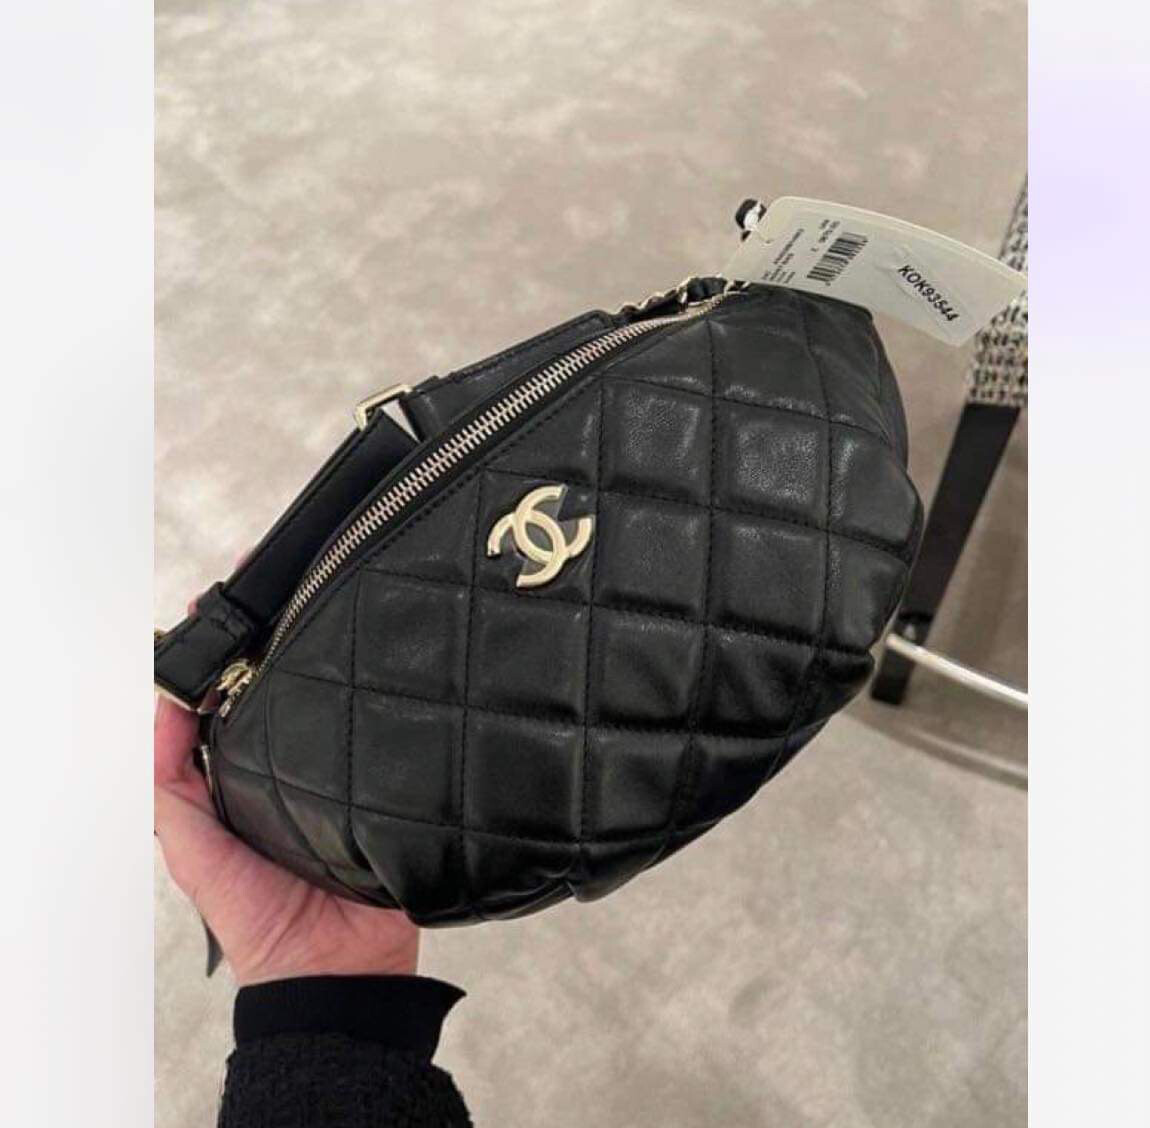 Preorder Chanel Bum Bag Black, New In Box